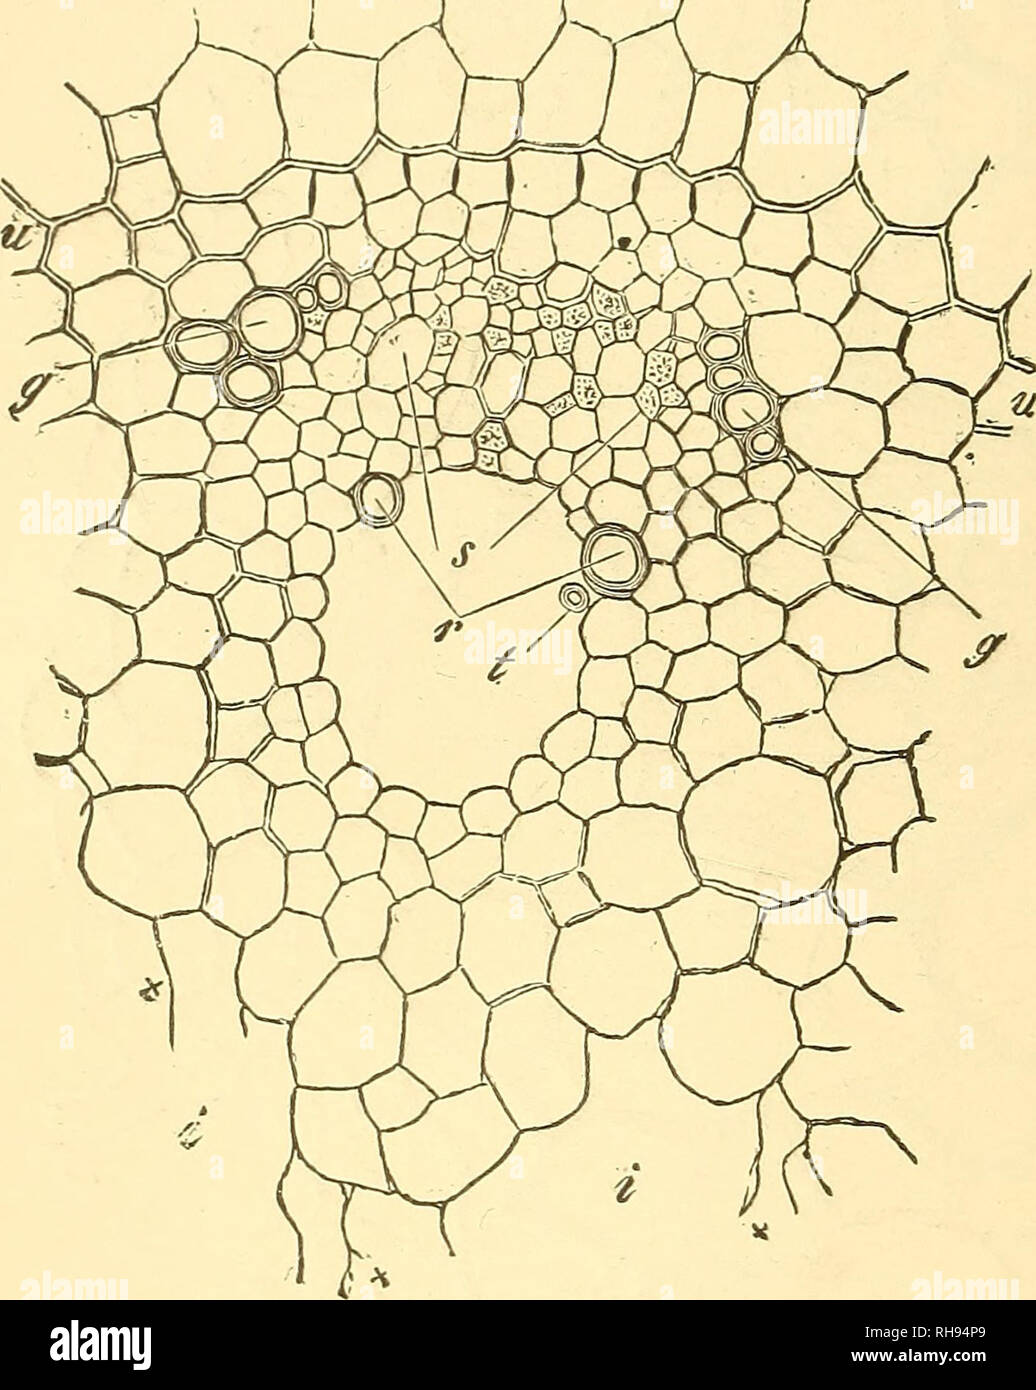 . Botany for high schools and colleges. Botany. no BOTANY. differentiatecl, being composed of parenchyma and poorly developed sieve tubes {s, Fig. 97). The whole bundle is sur- rounded, as in Pteris aquilma, by a bundle sheath (ii, Fig. 97). In the outer part of the mass of scalariform tissue are a few narrow spiral vessels {sp, sp. Fig. 97), but they are not sufficiently numerous to constitute a ring or layer. 138.âIn the root of Adiantum Moritzianum the bundle consists of a cen- tral plate of tra- cheary tissue (^r, Fig. 98), with a mass of sieve tissue on each side of but not quite envelopi Stock Photo